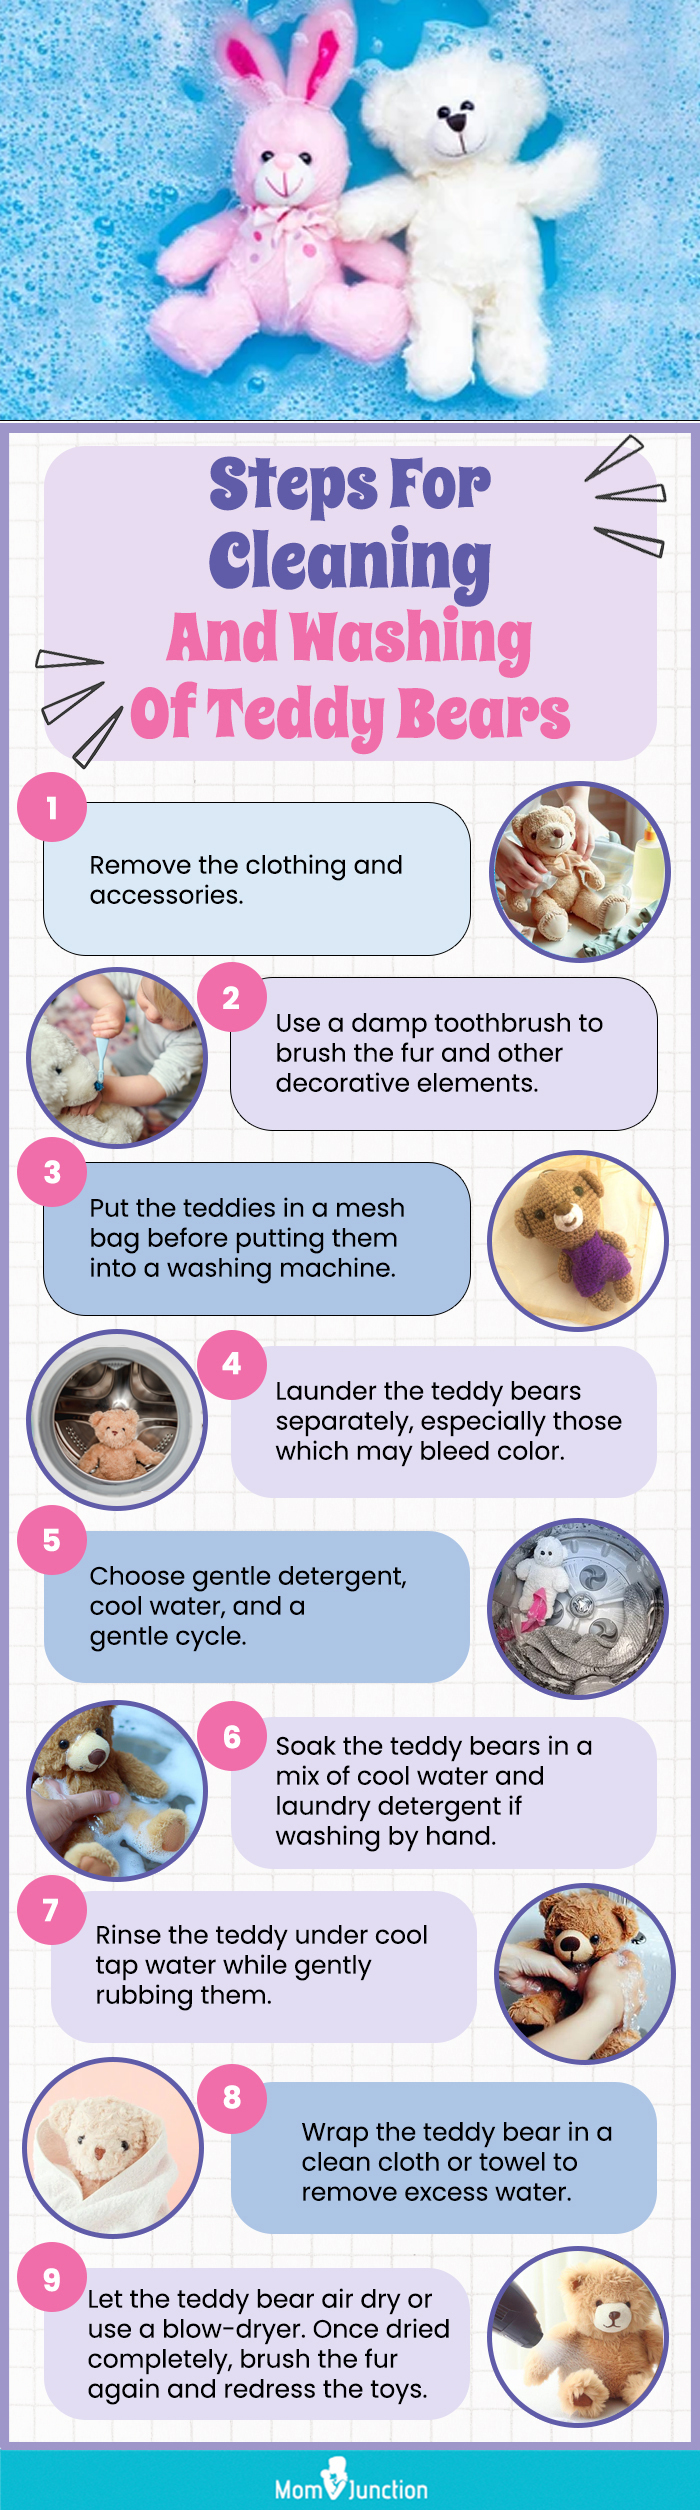 Steps For Safe Cleaning And Washing Of Teddy Bears (infographic)